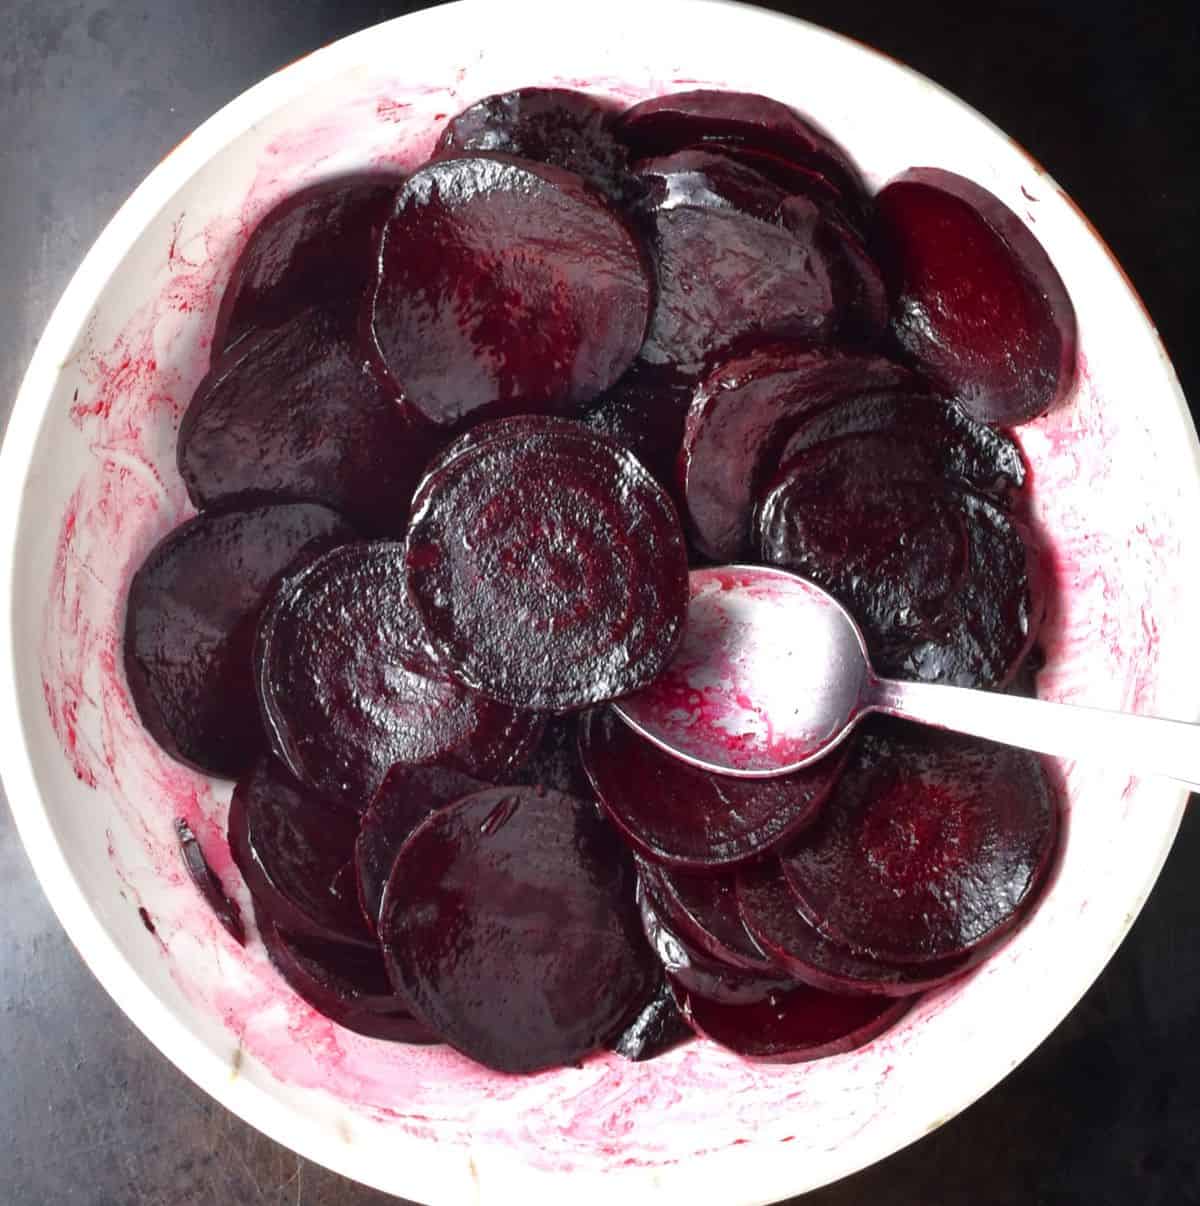 Top down view of sliced beets in white bowl with spoon.